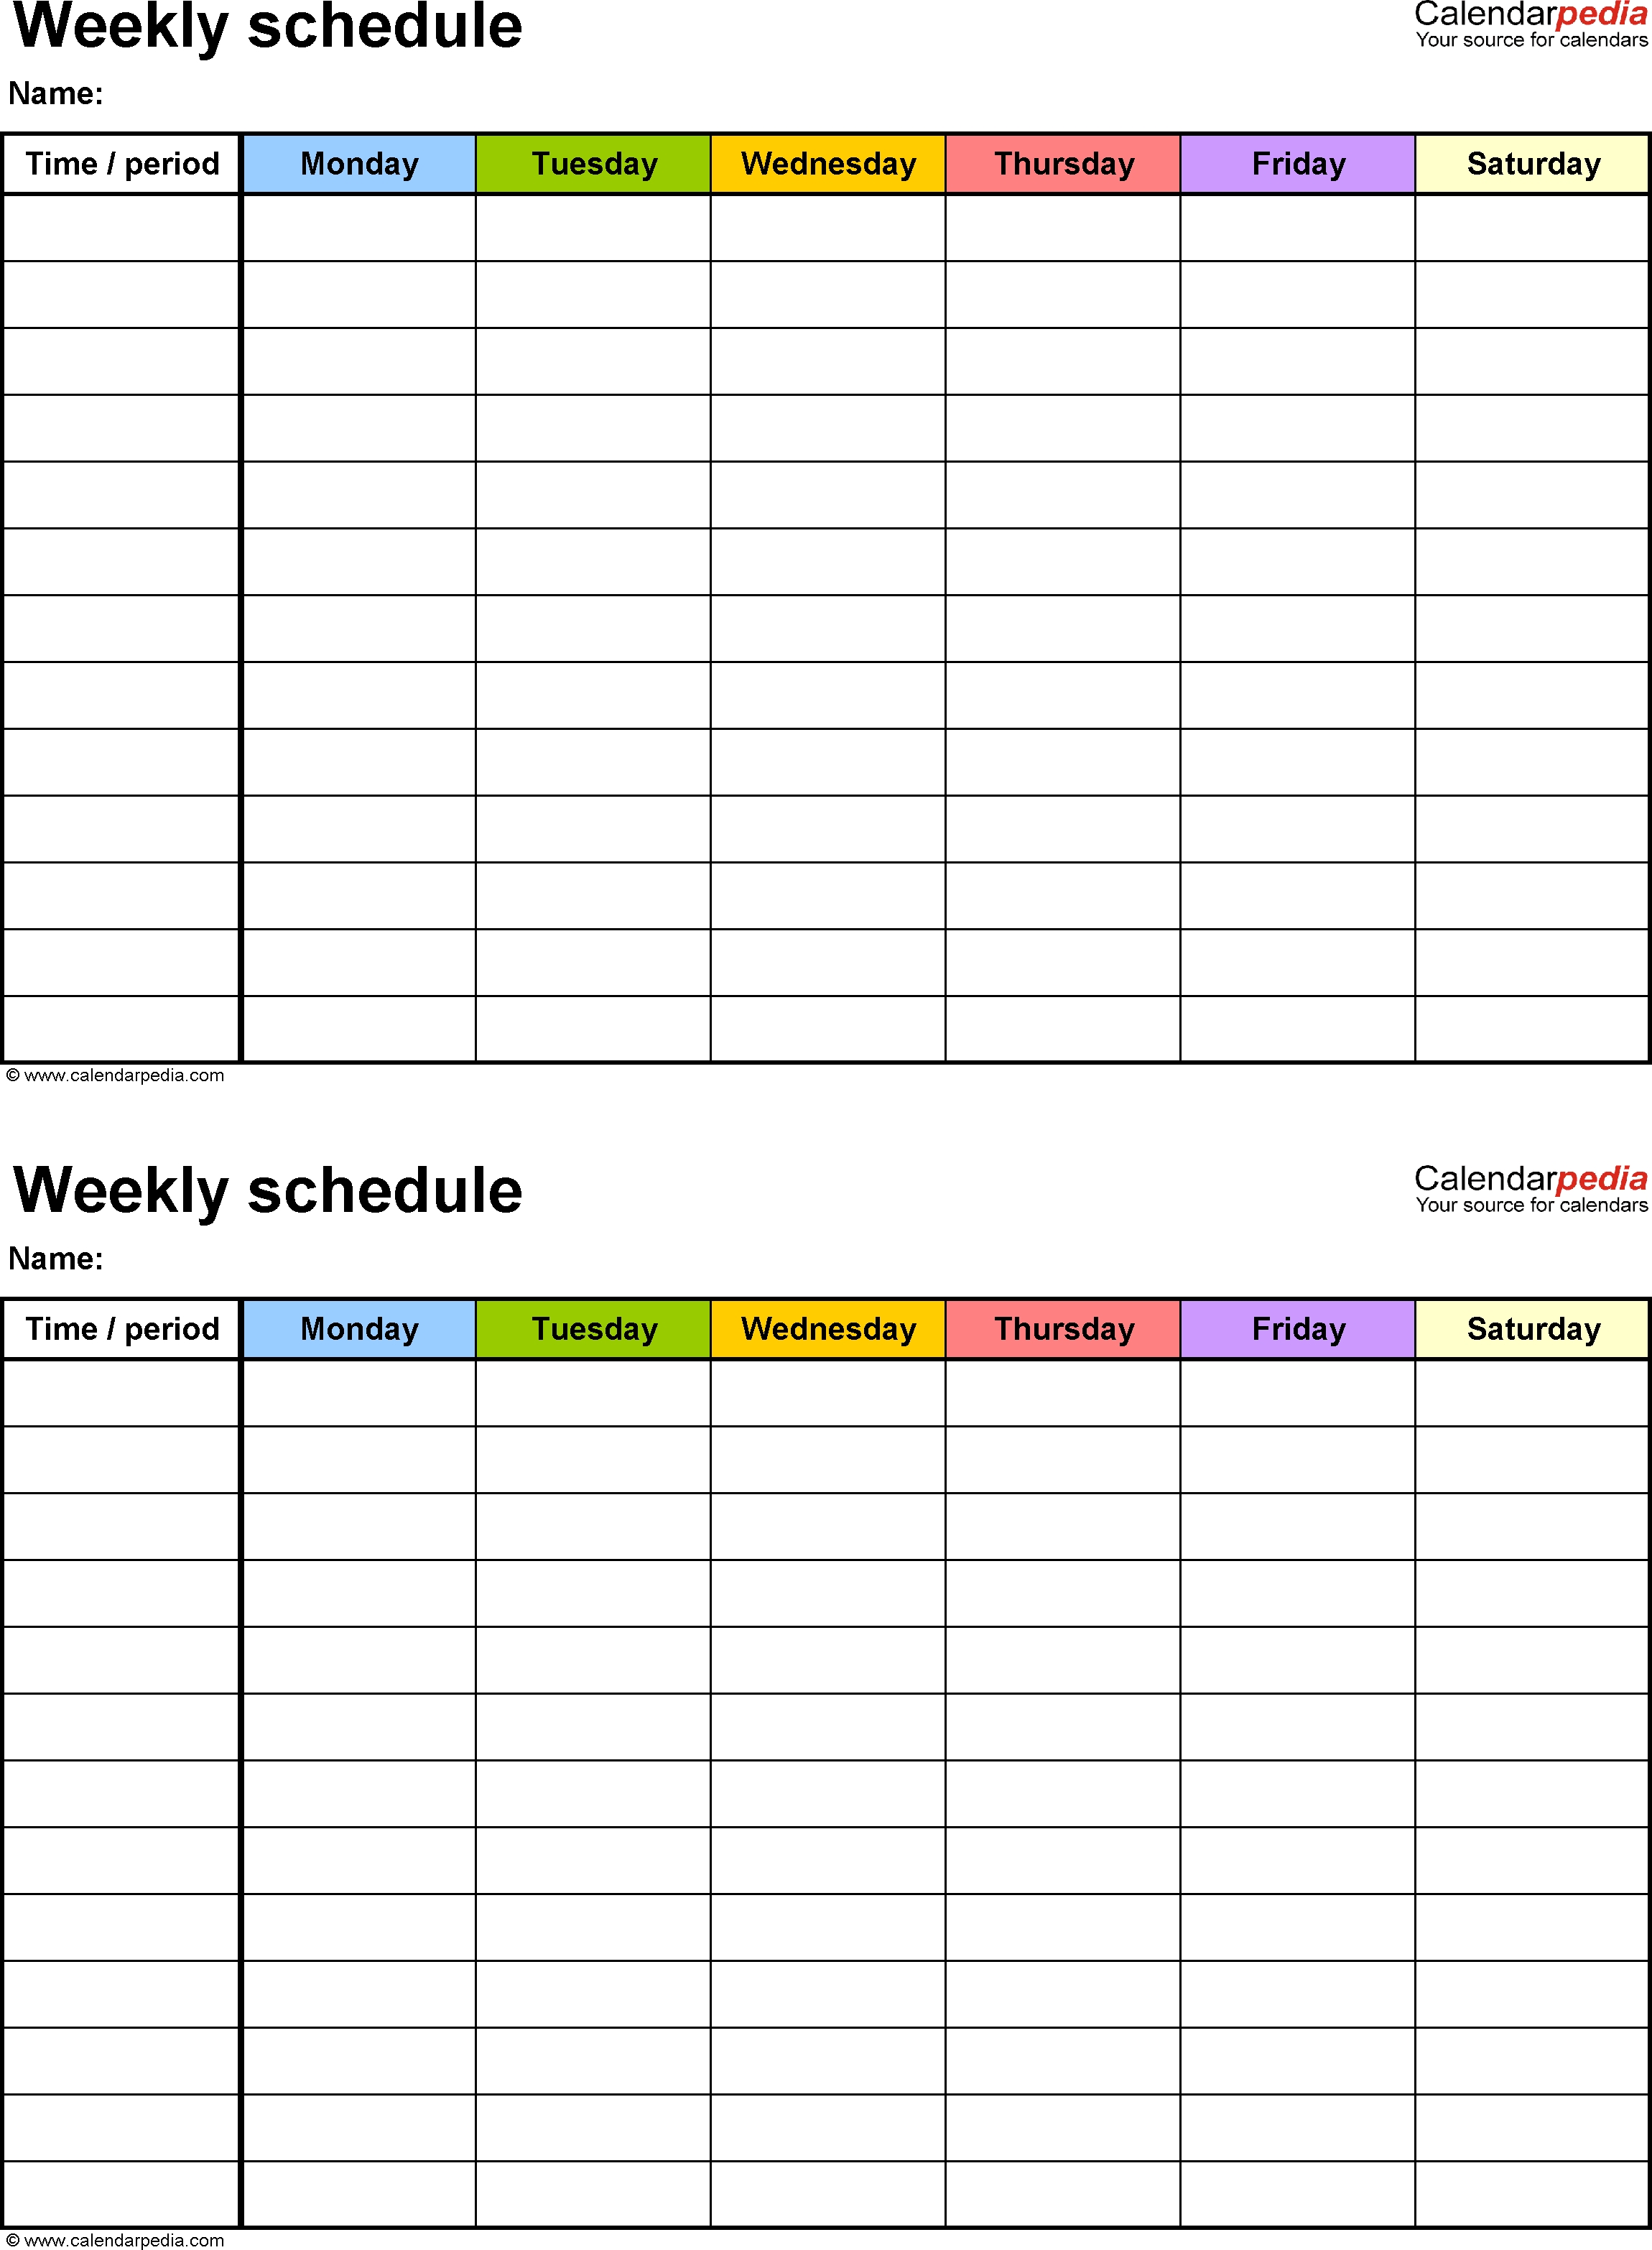 Free Weekly Schedule Templates For Word - 18 Templates inside 7-Day Weekly Planner Template Printable